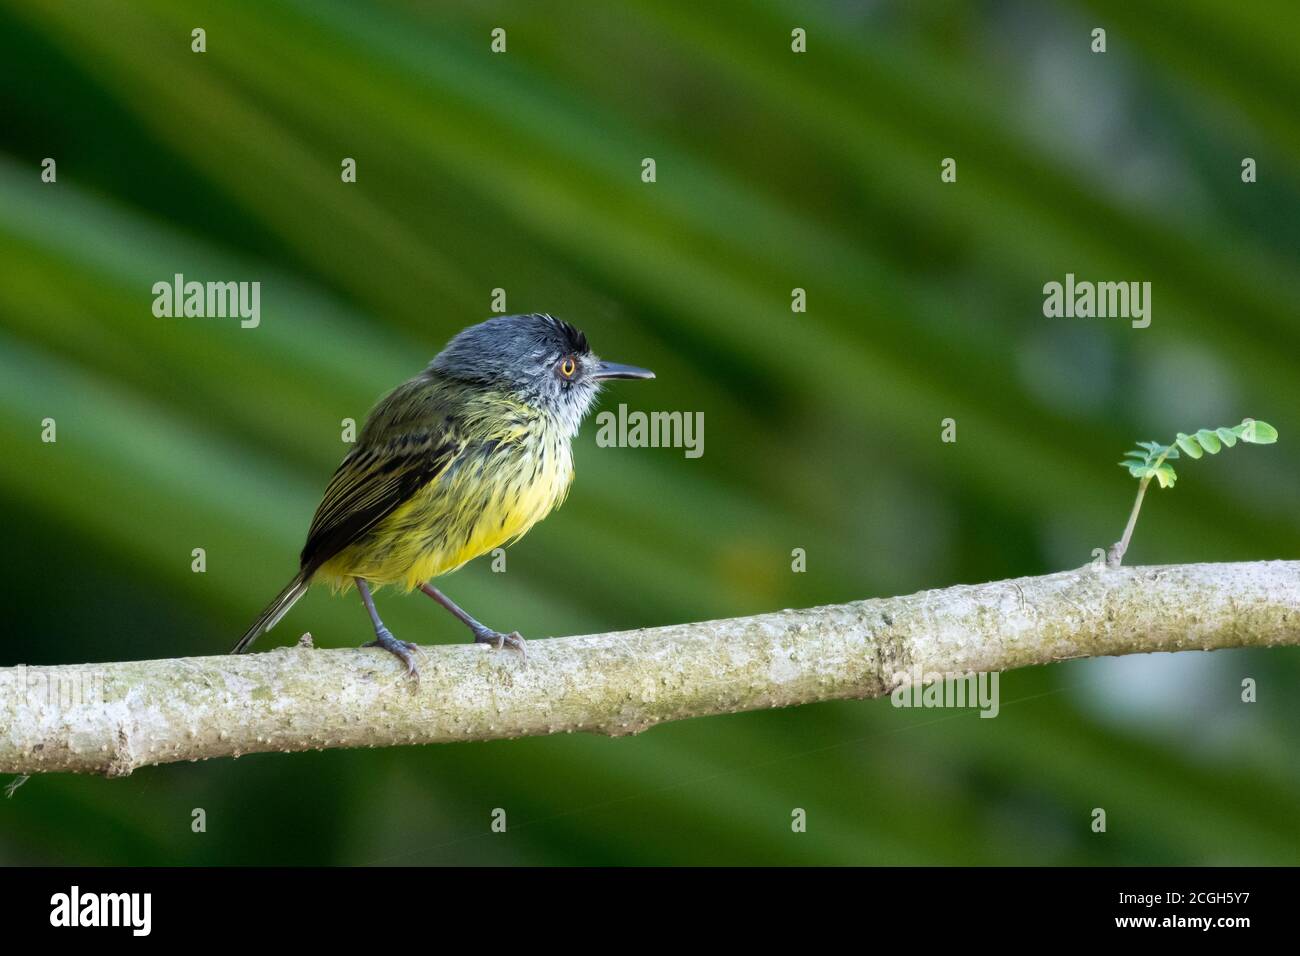 A Spotted Tody perching on a branch in a mangrove. Small yellow bird. Wildlife in the forest. Stock Photo